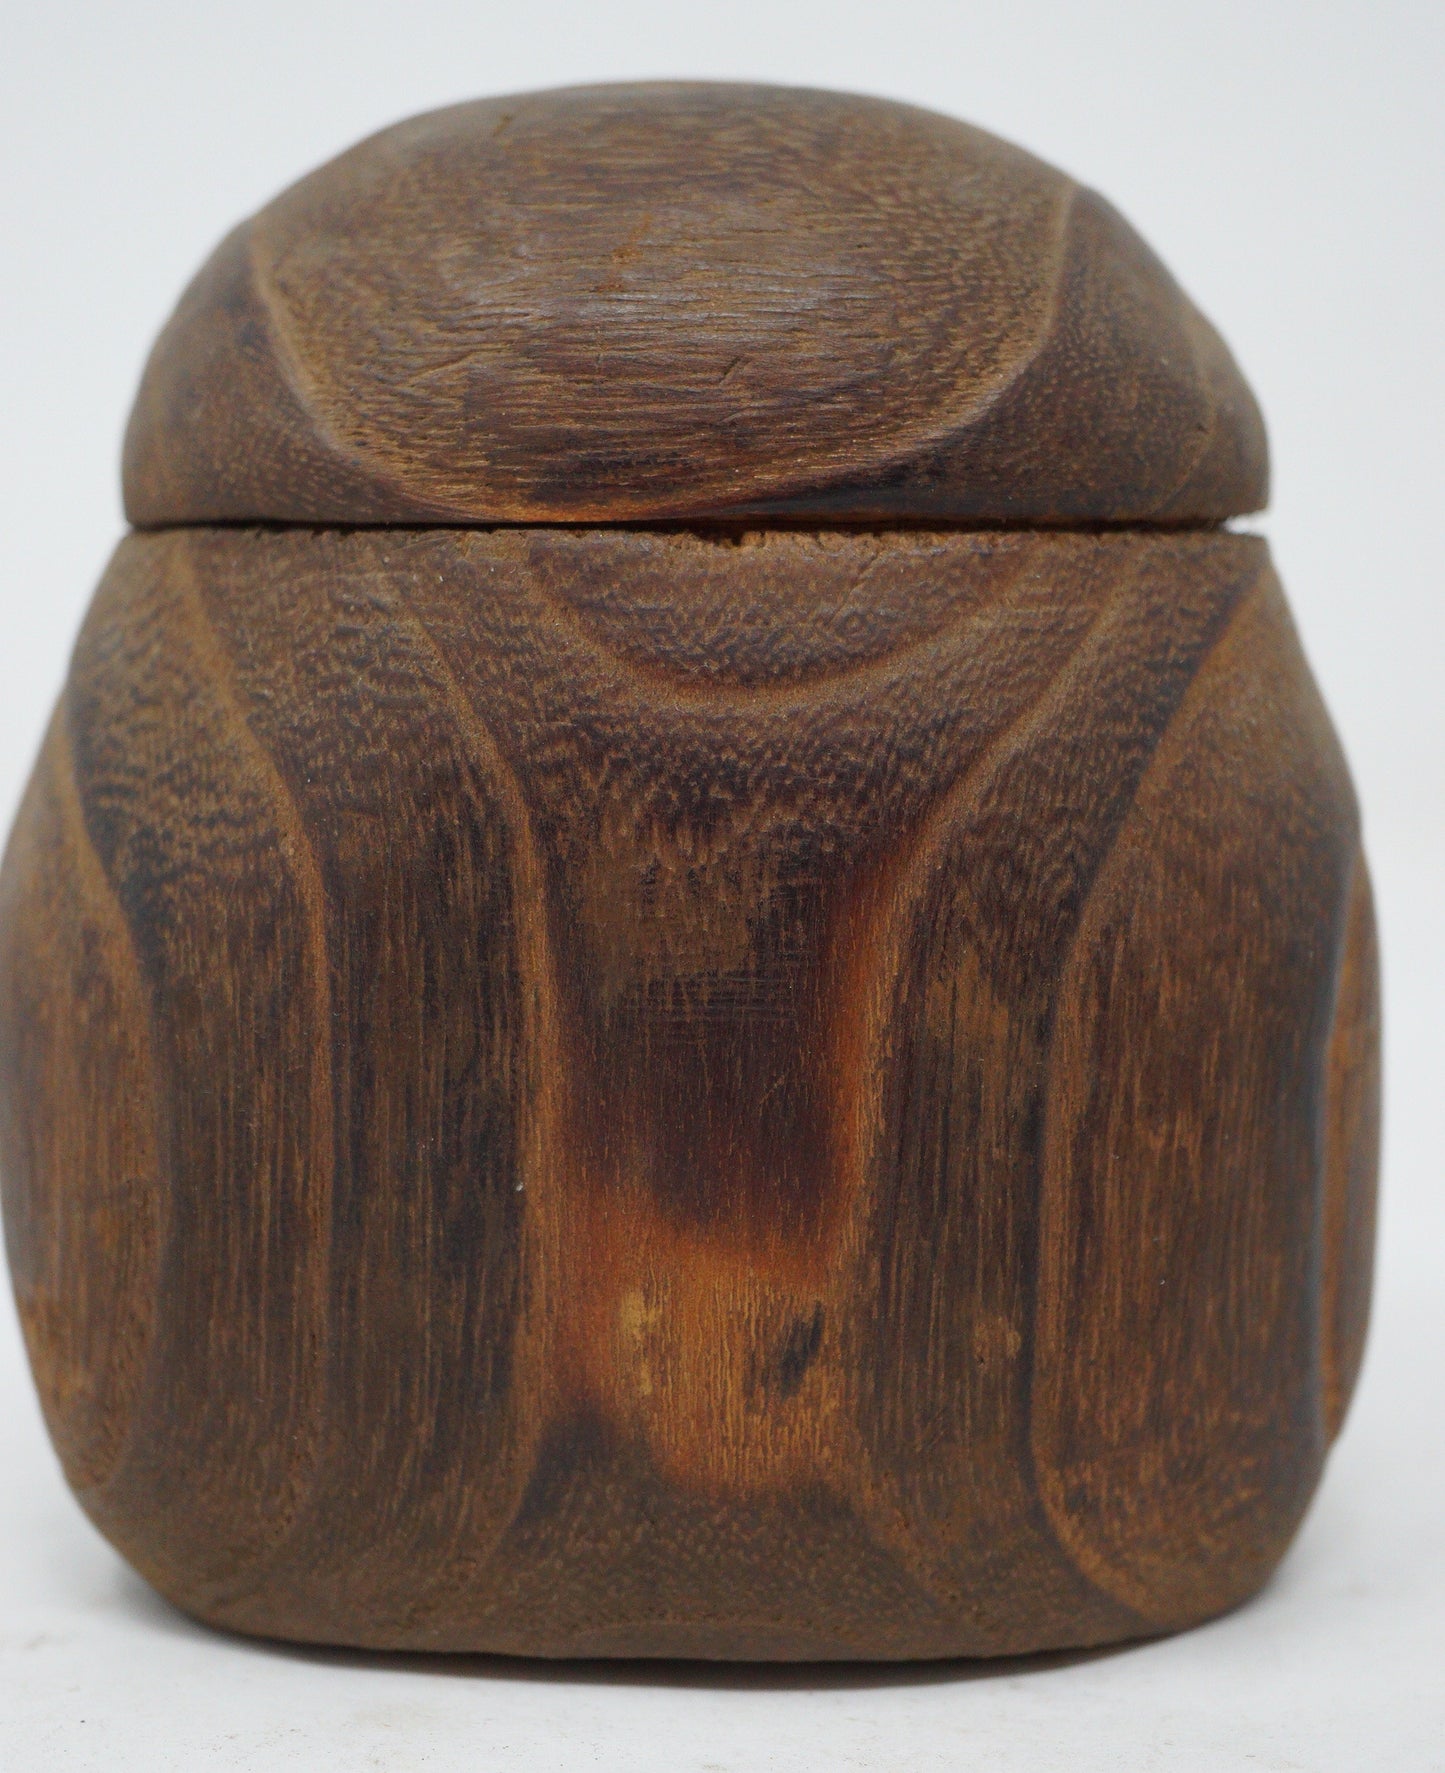 Japanese Inro-like Container with one chamber Vintage Woodcraft from Japan 1227D20